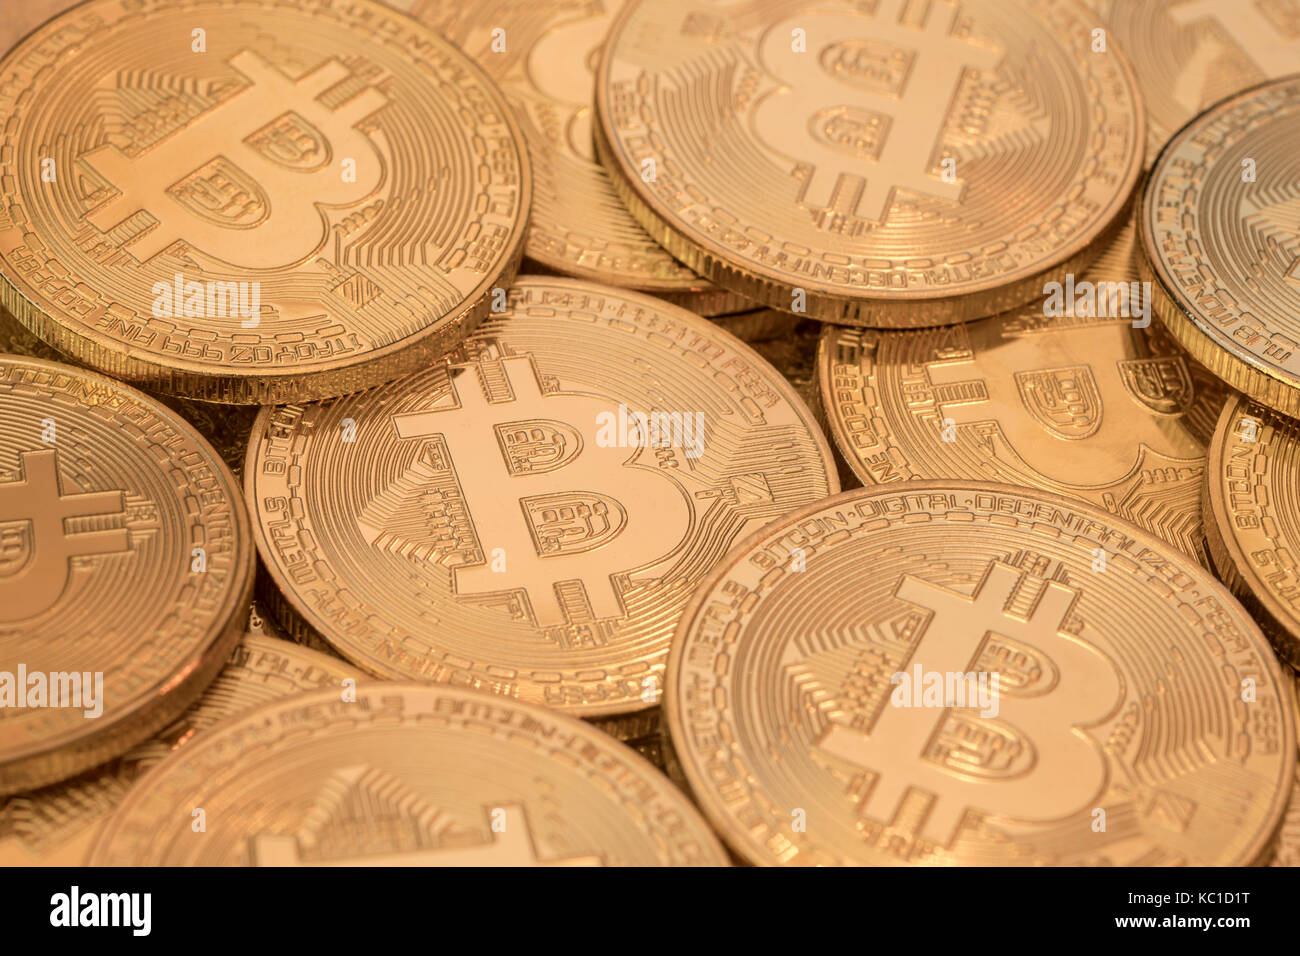 Gold Bitcoins as metaphor for concept of virtual currency, peer to peer digital payment, darkweb cybercrime, general cryptocurrencies, & exchange rate Stock Photo